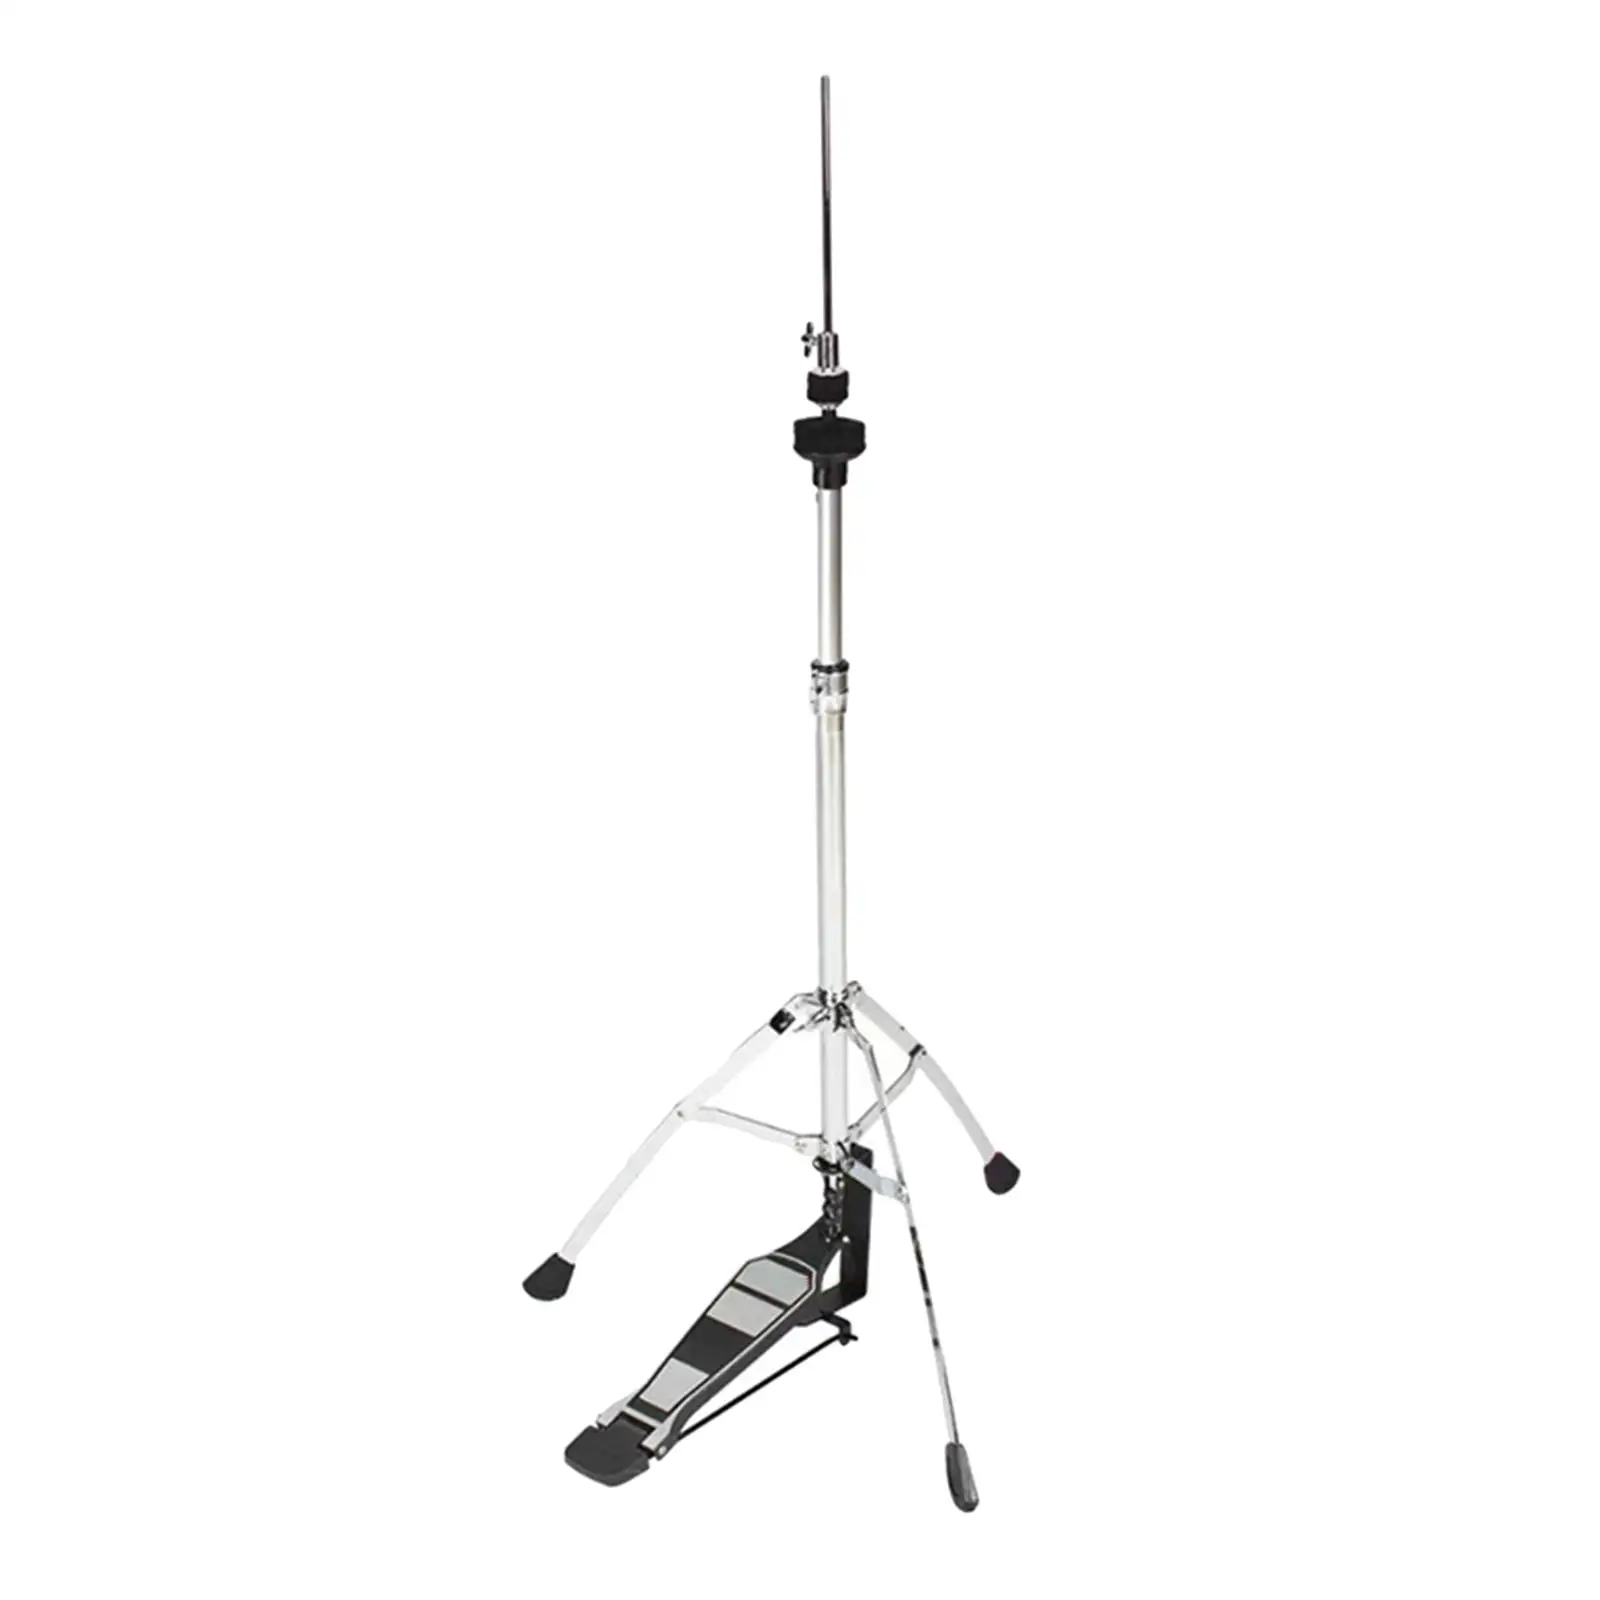 Metal High Hat Stand,Swivel Legs,Double Braced Cymbal Arm,Folding Bracket Cymbal Stand,Drum Stand Height Adjustable Accessories